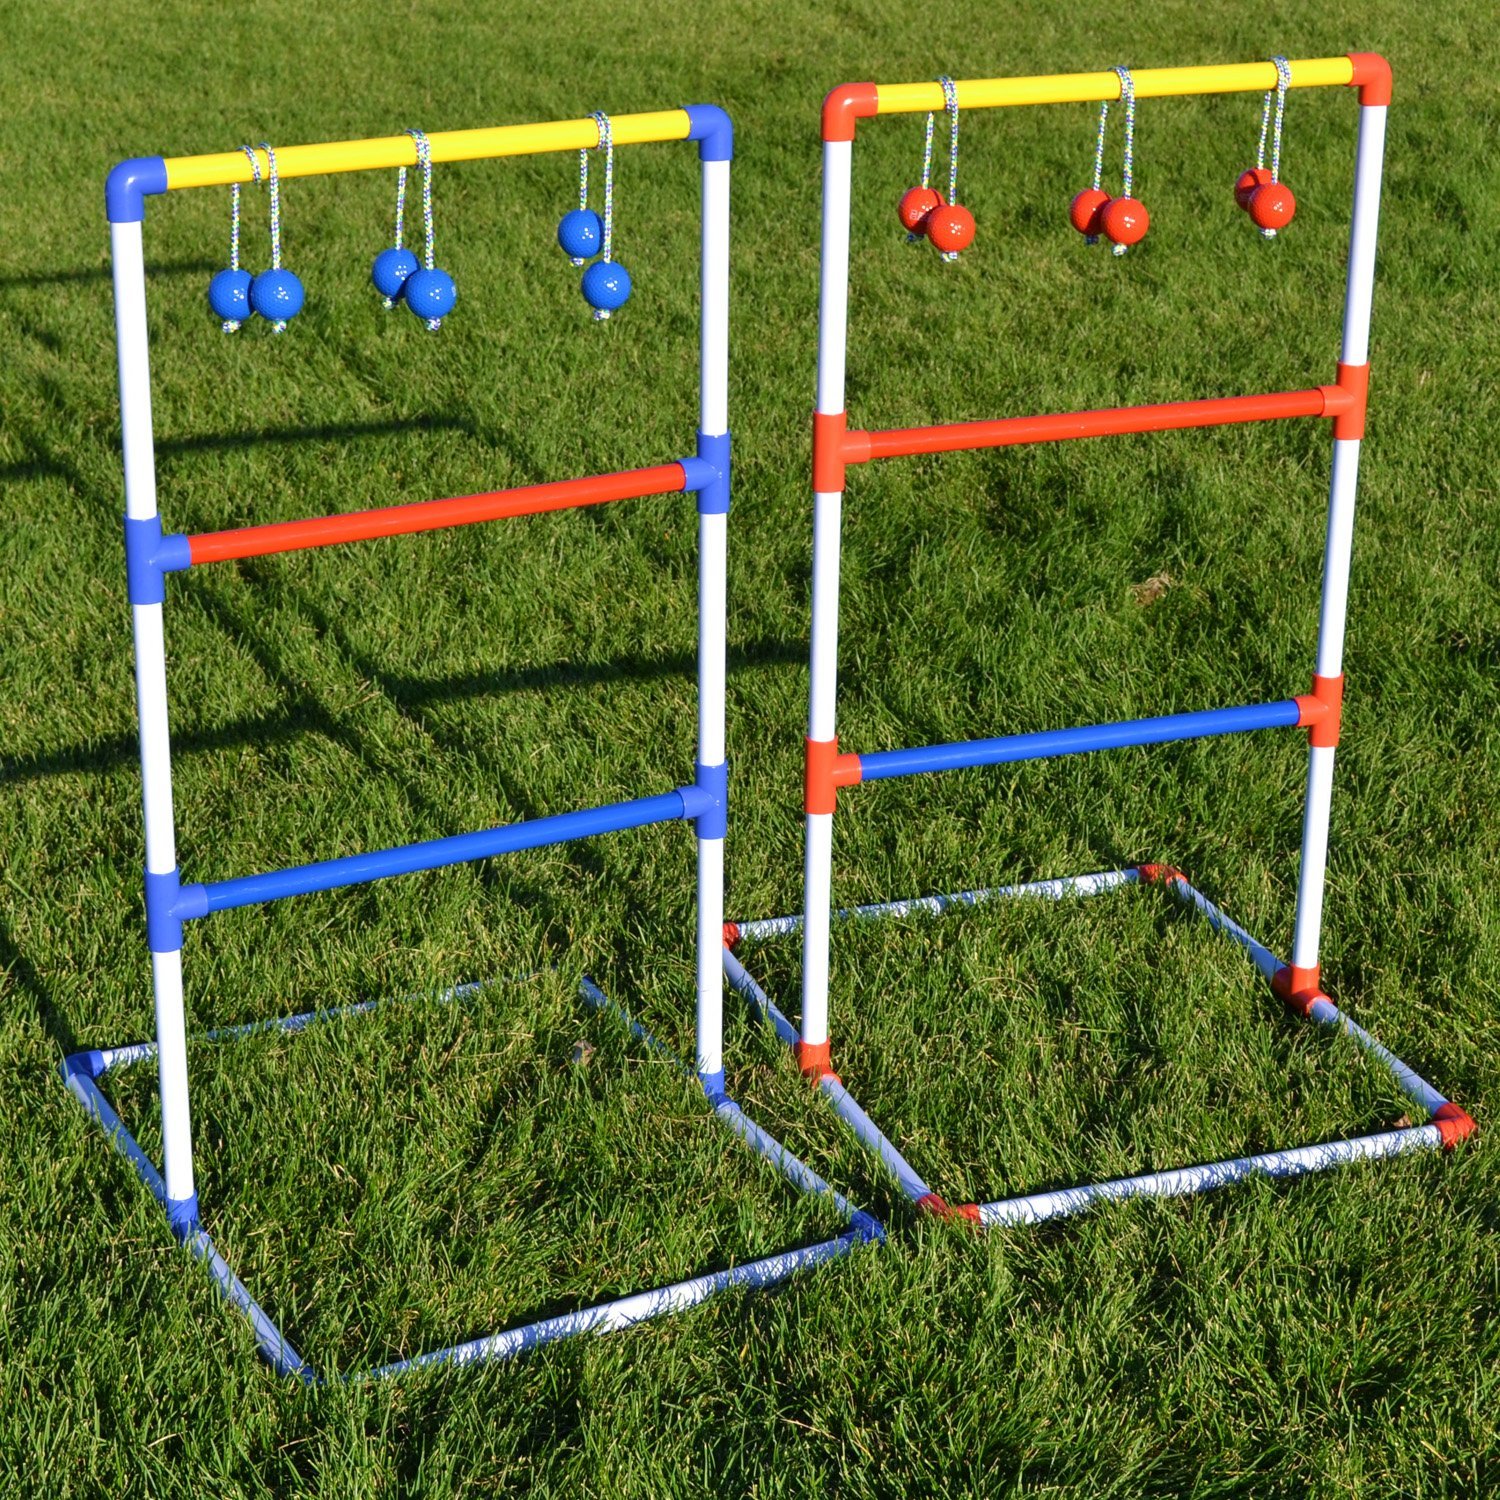 Tabletop Ladder Ball Toss Game with 8PCS Weighted Bolas Balls Desktop Interactive Toy for Kids Adults Party Game LQKYWNA Ladder Toss Game Set